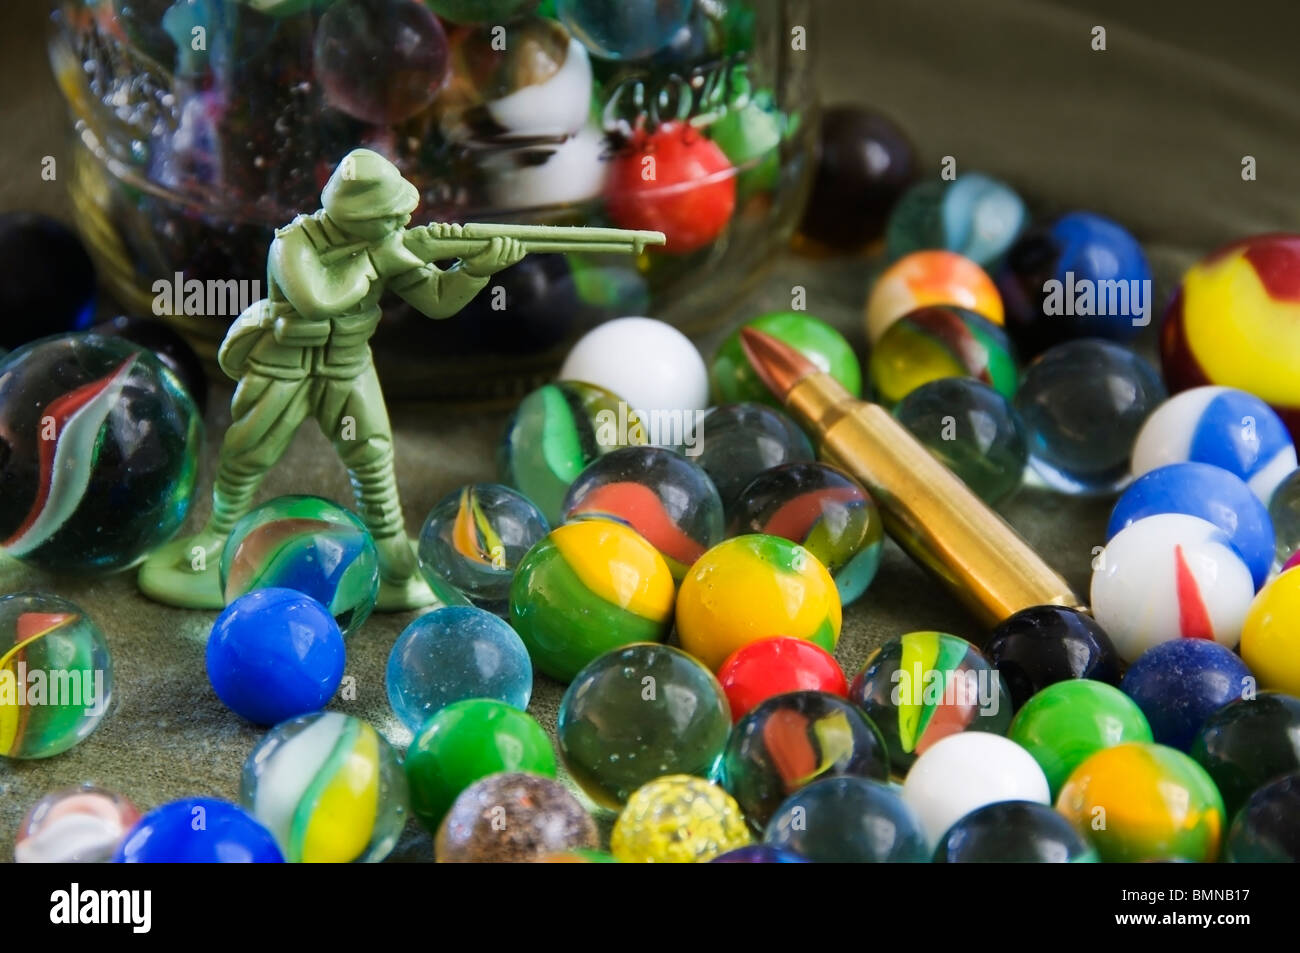 Collection of multicolored marbles, a green plastic toy soldier action figure and a rifle round. Stock Photo